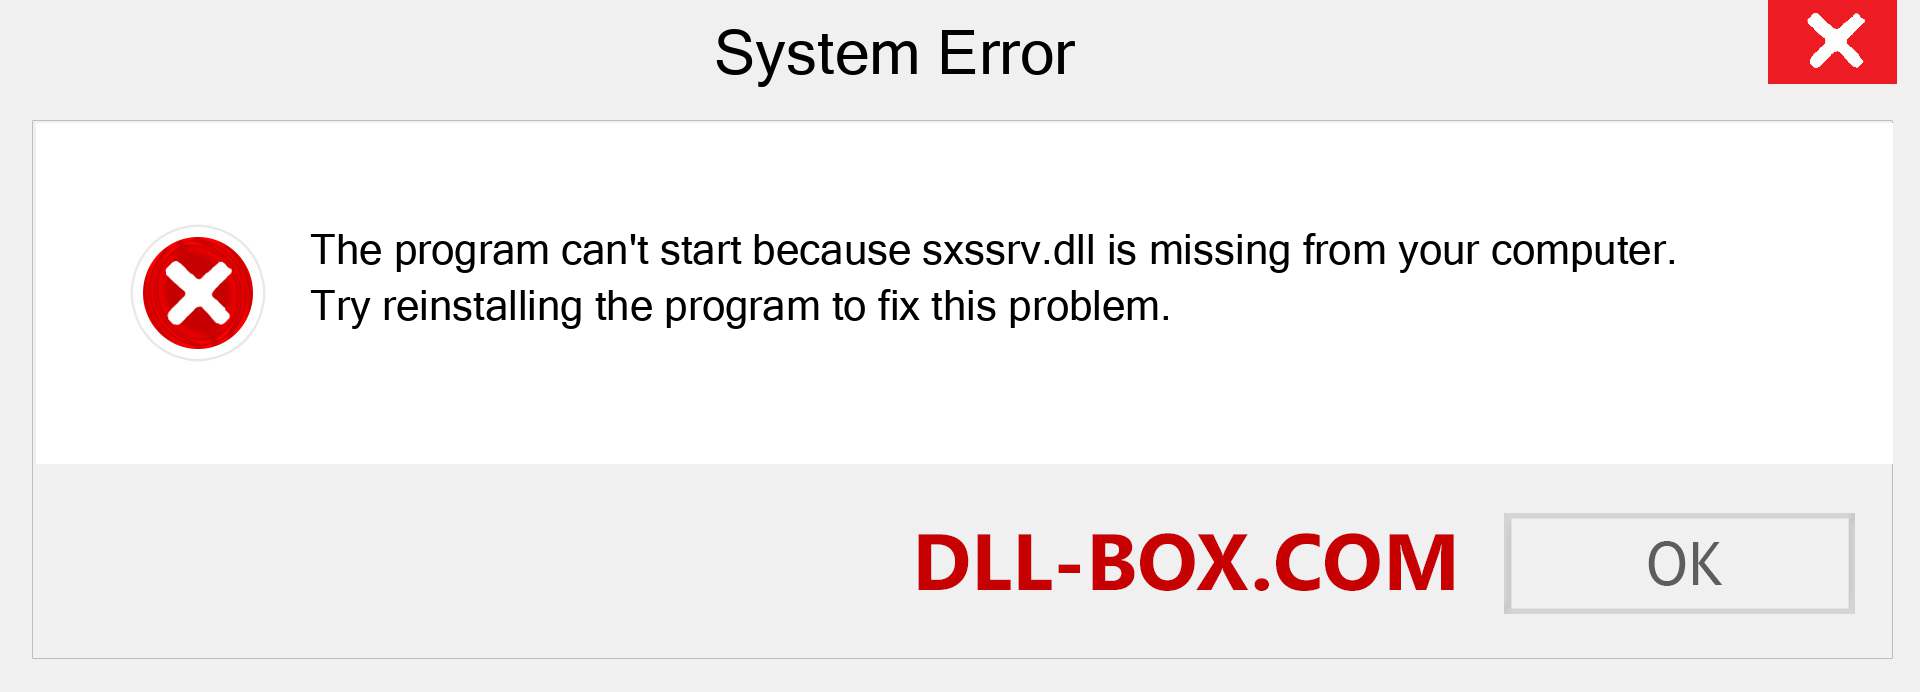  sxssrv.dll file is missing?. Download for Windows 7, 8, 10 - Fix  sxssrv dll Missing Error on Windows, photos, images